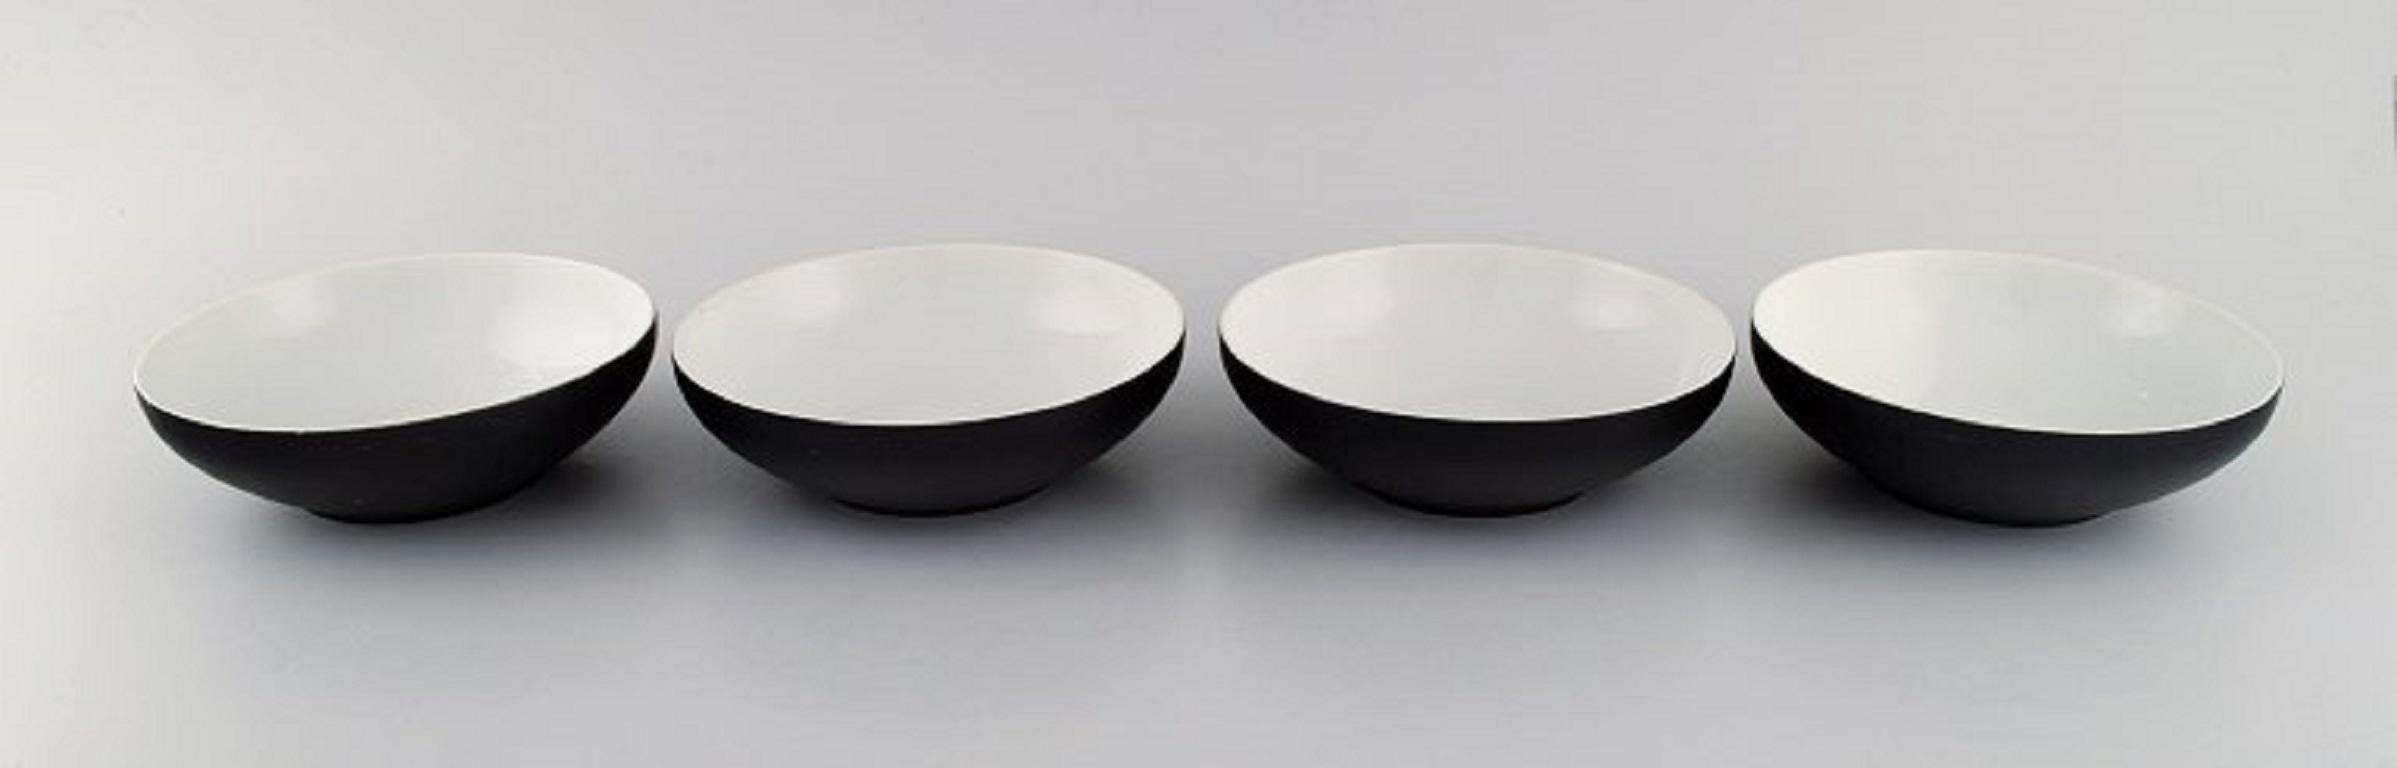 Kenji Fujita for Tackett Associates. Four bowls in porcelain. Dated 1953-56.
Measures: 15.5 x 5 cm.
In excellent condition.
Stamped.